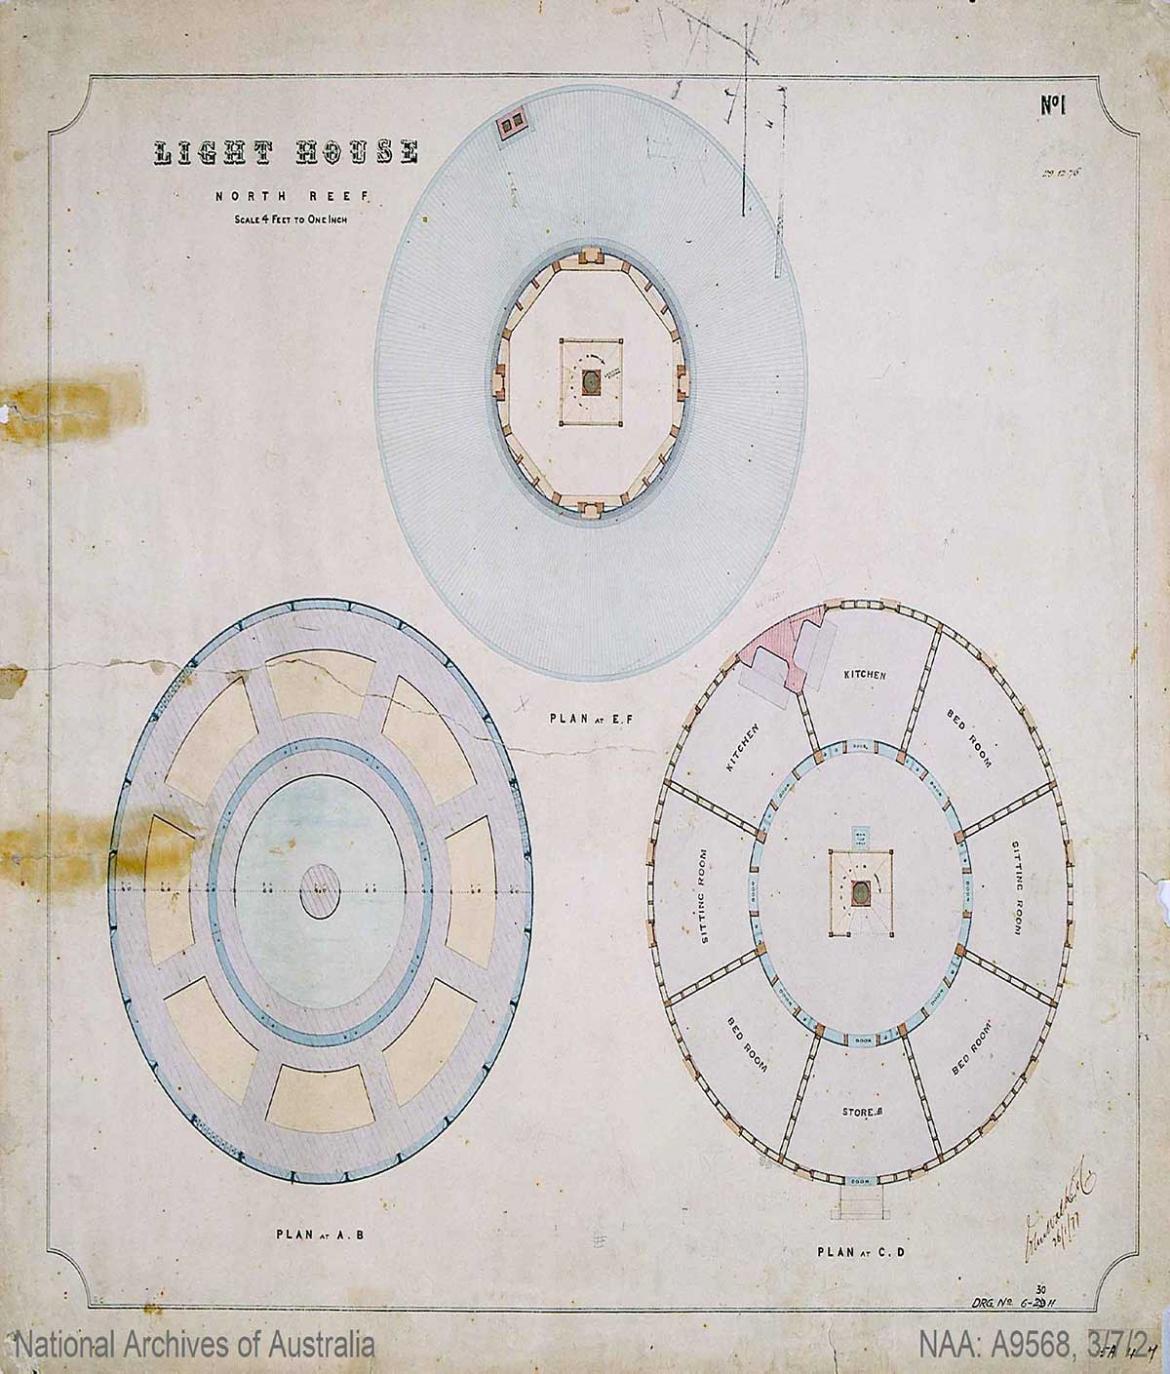 Figure 13. Blueprint design of North Reef ground floor. Courtesy of the National Archives of Australia. NAA: A9568, 3/7/2. (© Commonwealth of Australia, National Archives of Australia))19